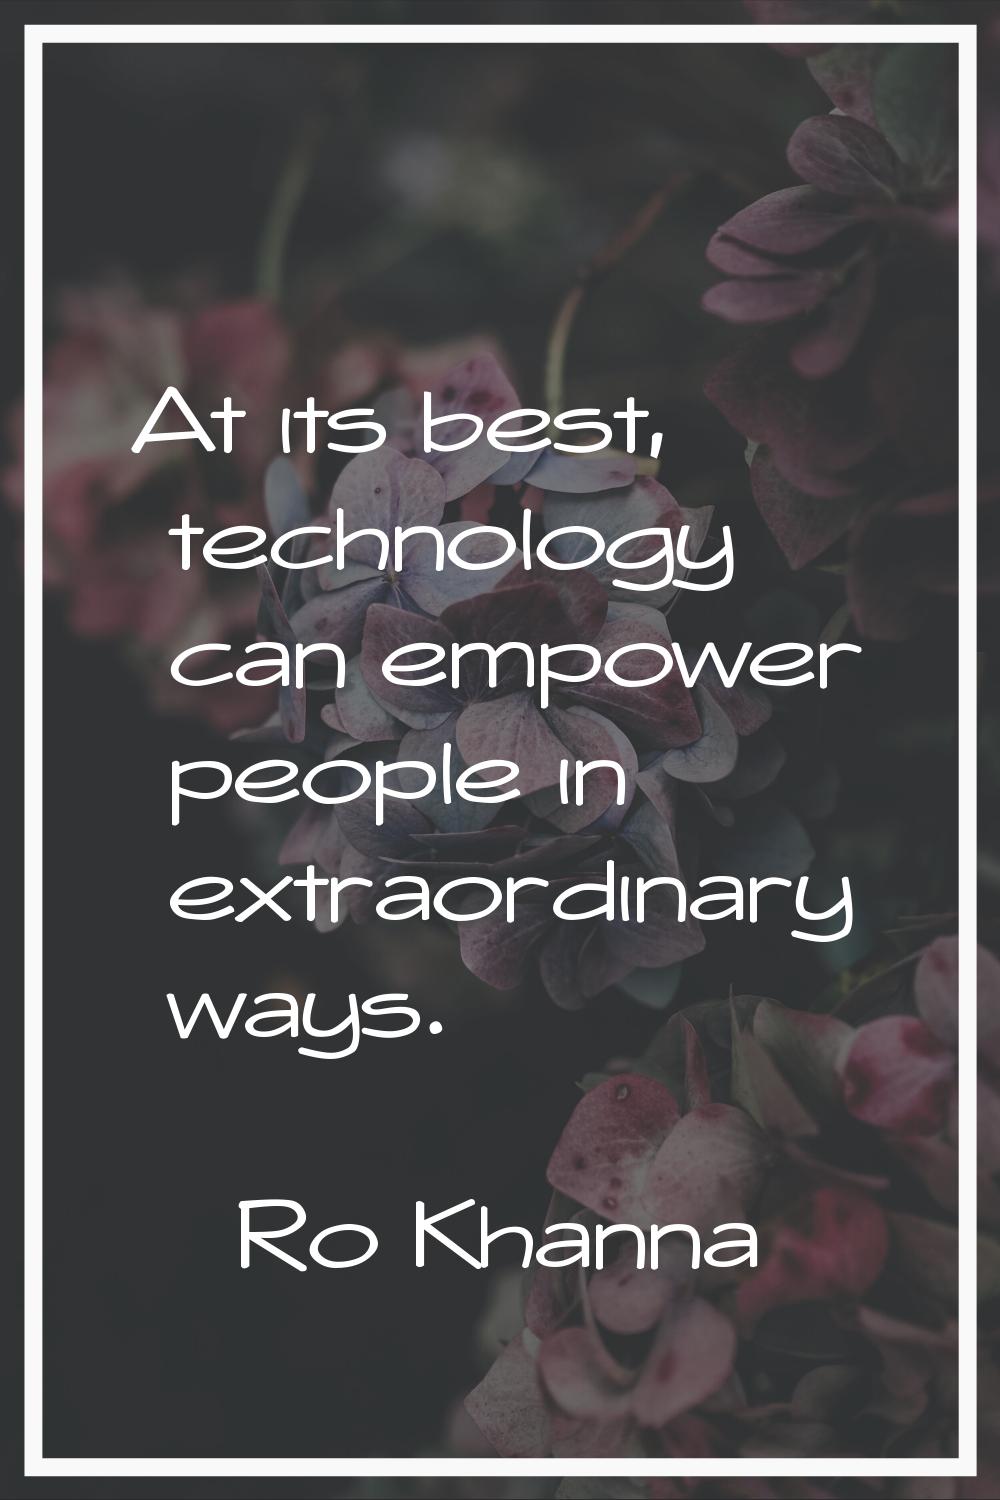 At its best, technology can empower people in extraordinary ways.